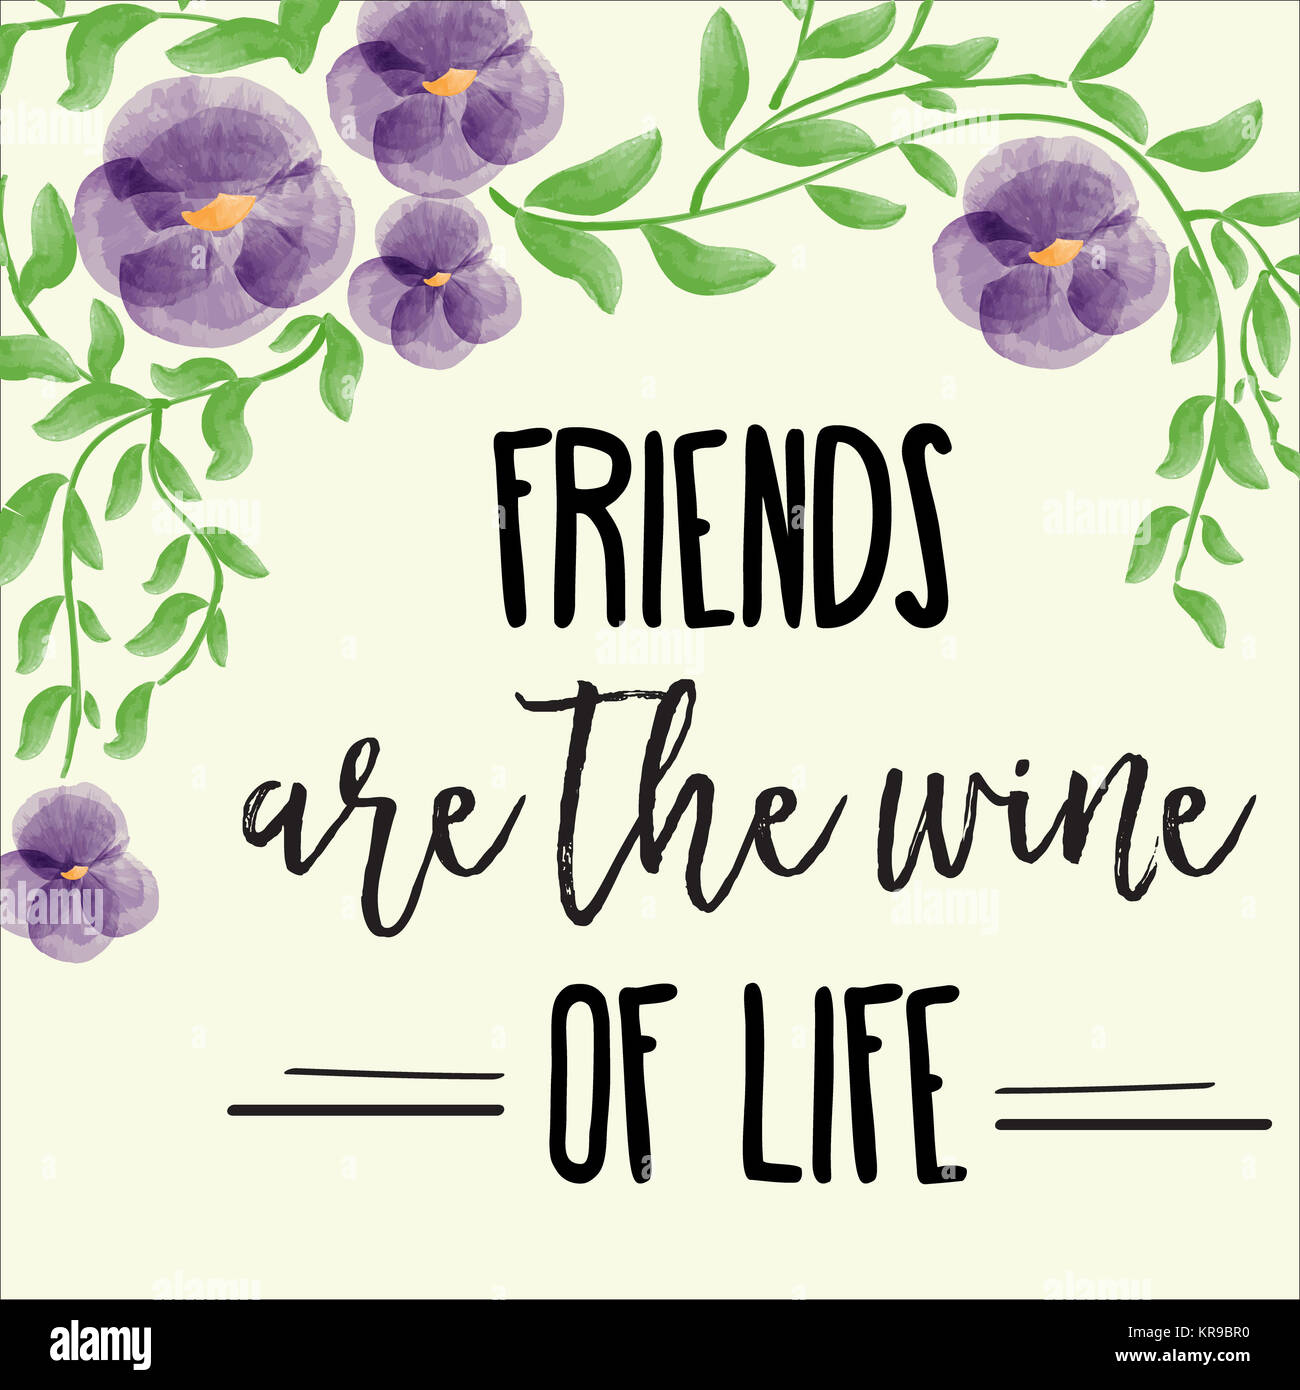 beautiful images of friendship quotes